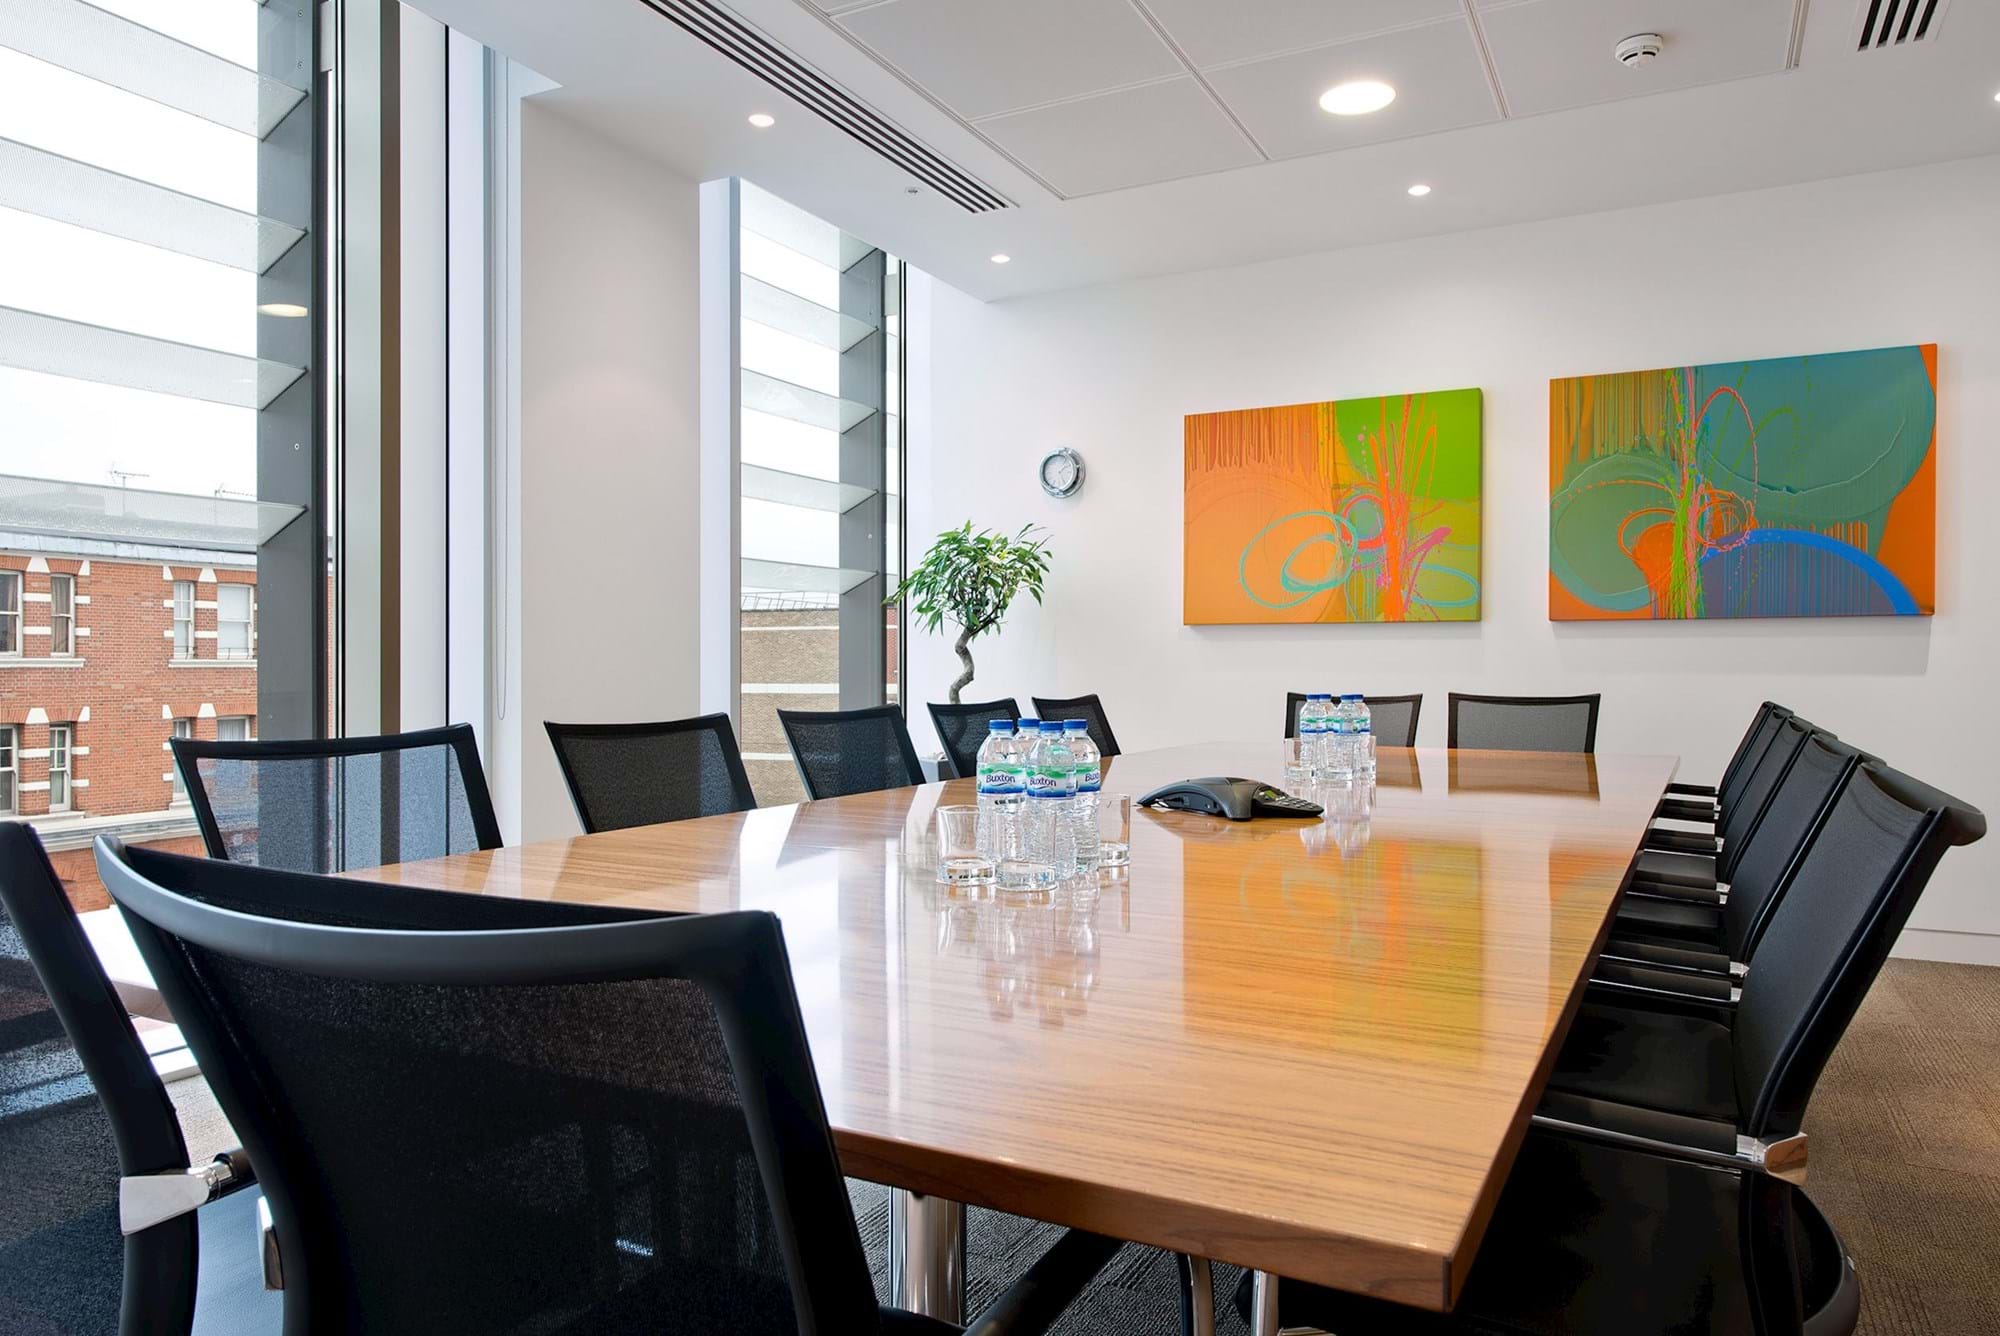 Modus Workspace office design, fit out and refurbishment - GIP - Meeting Room - GIP 07 b_highres_sRGB.jpg